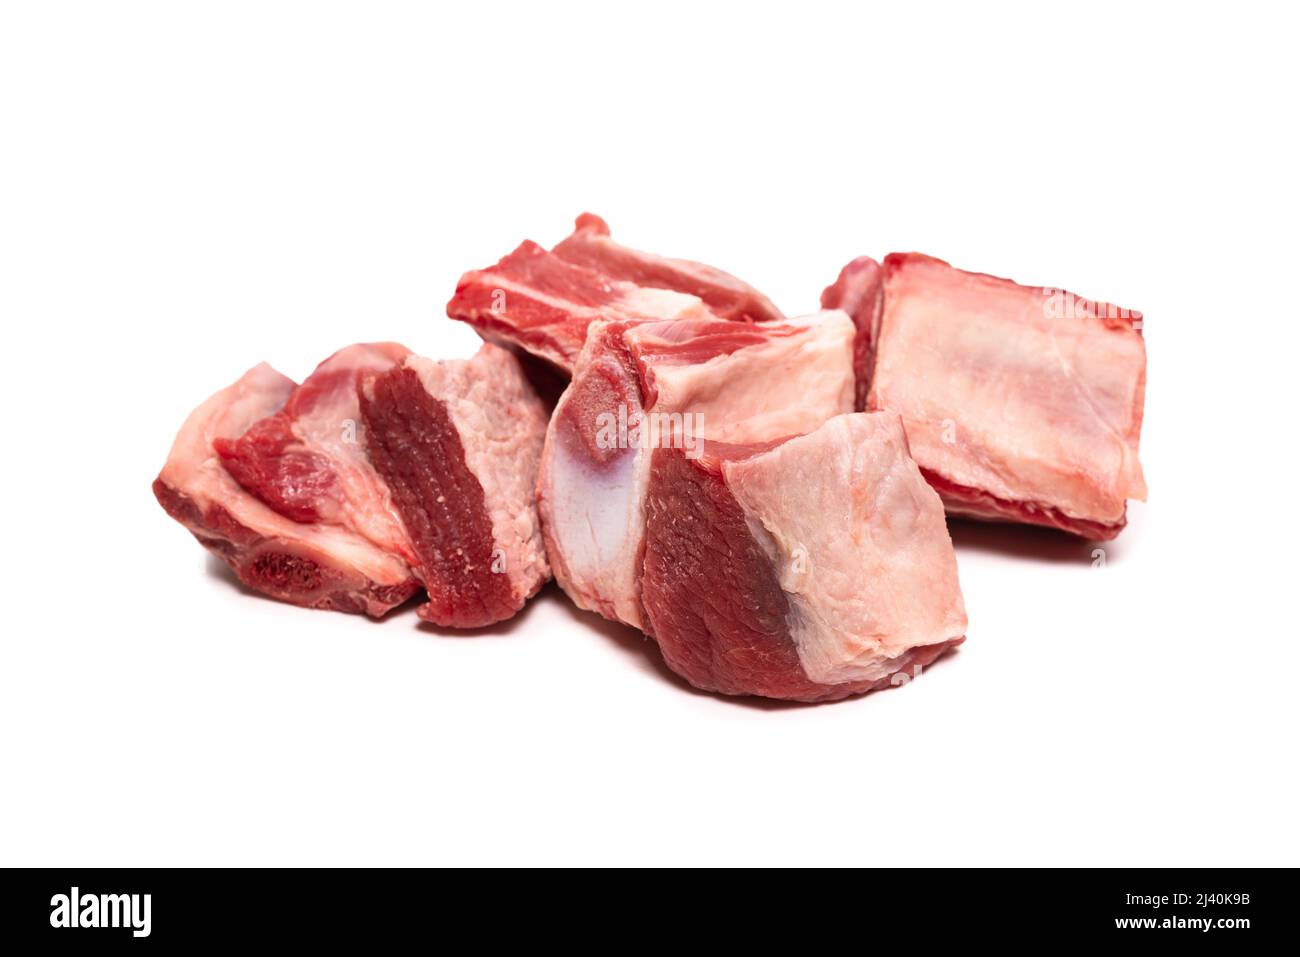 Raw beef ribs isolated on white background. Top view. Stock Photo